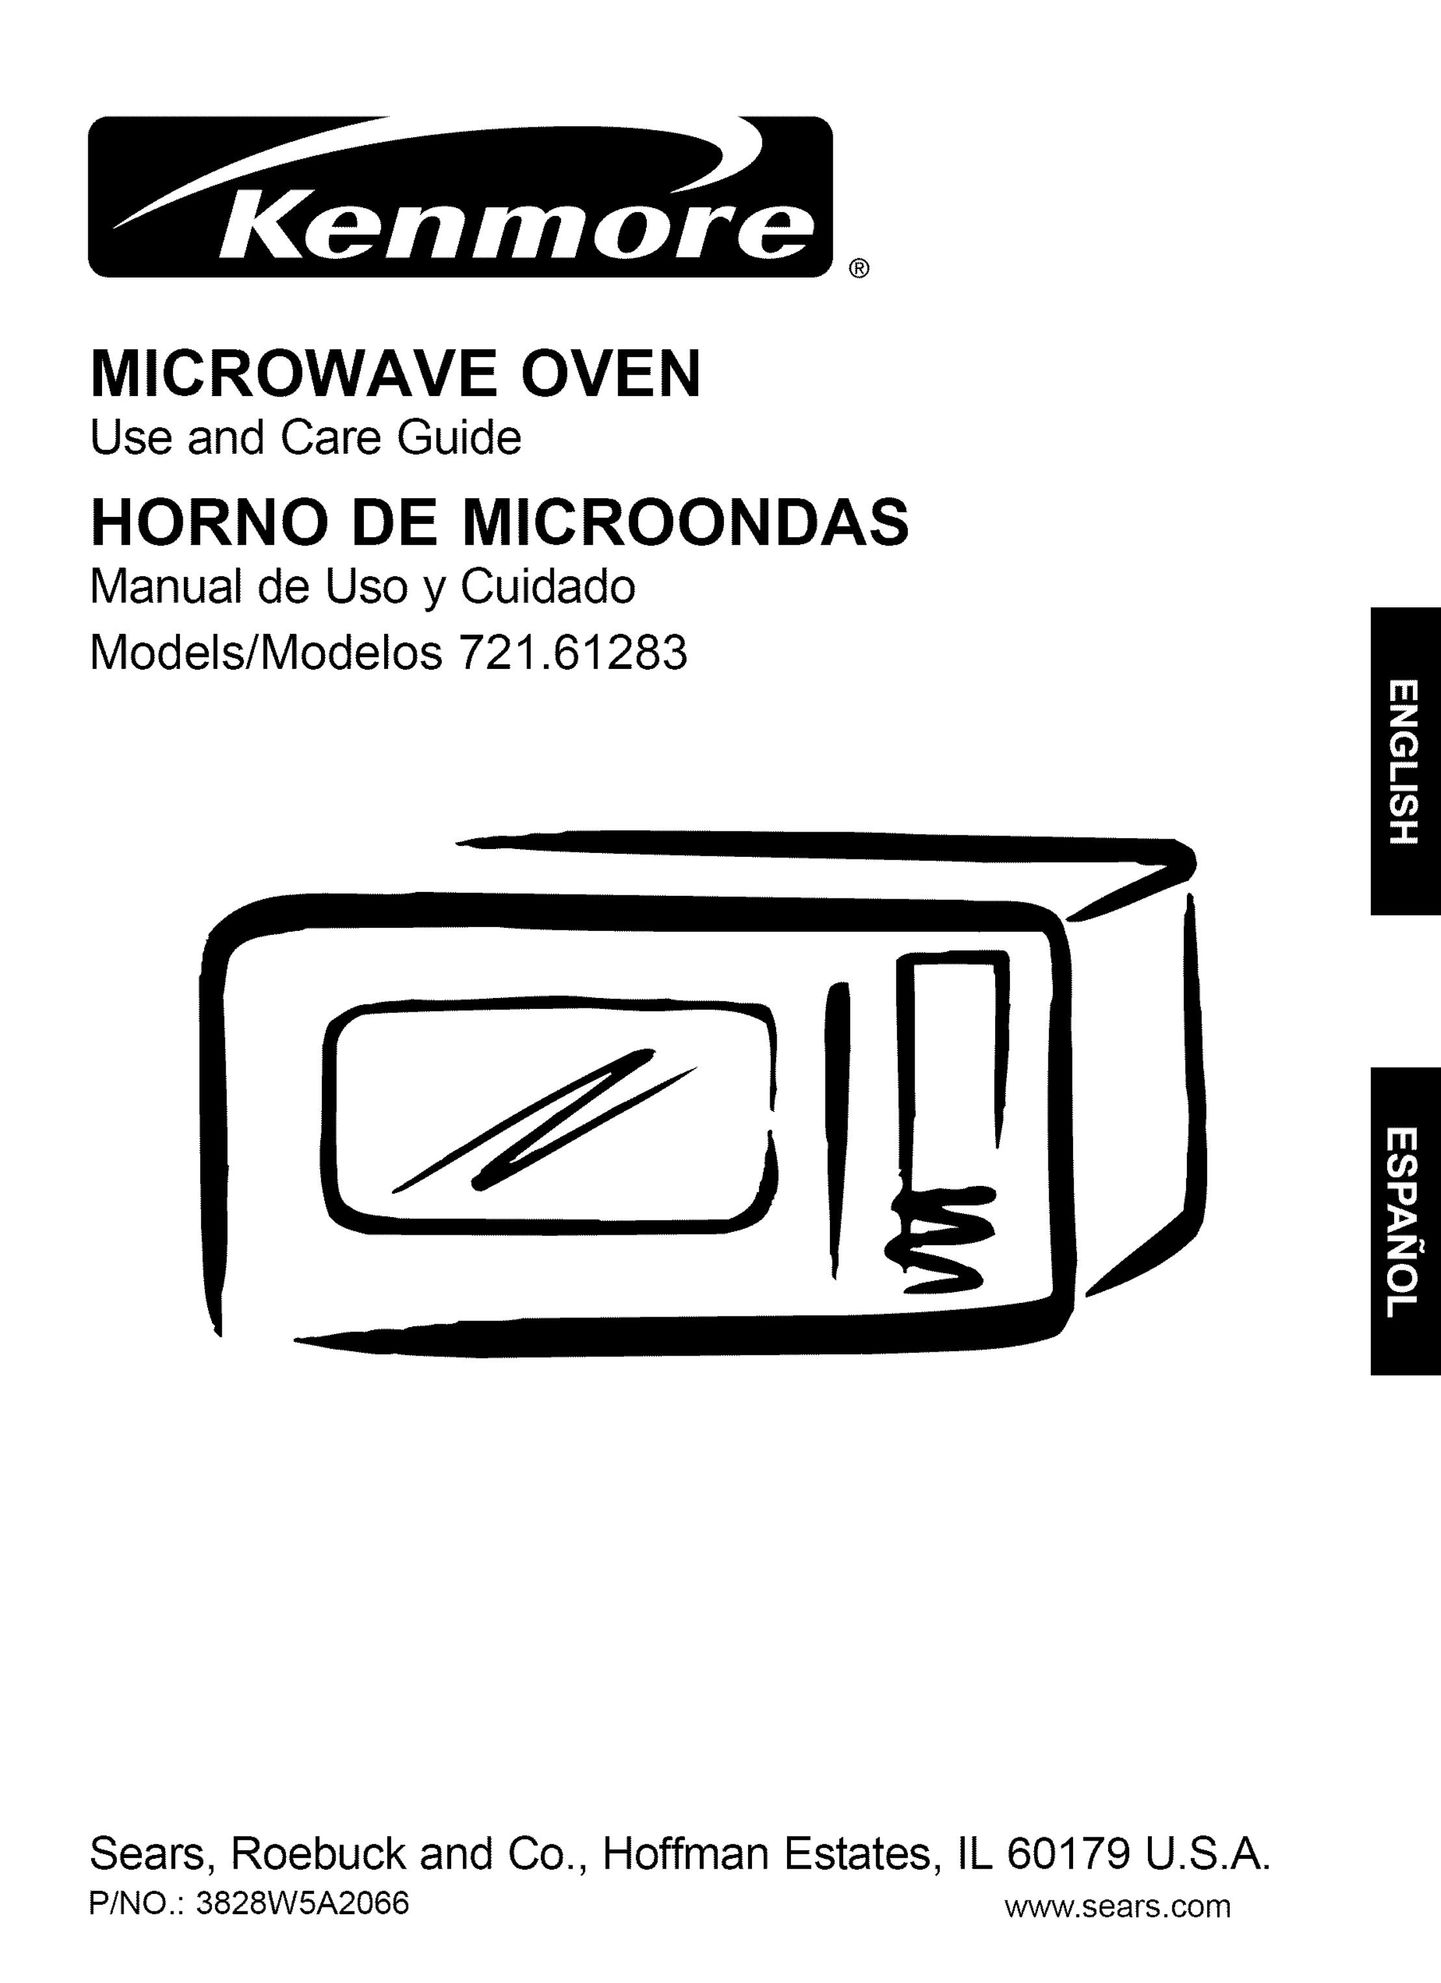 Kenmore 721.61283 Microwave Oven User Manual